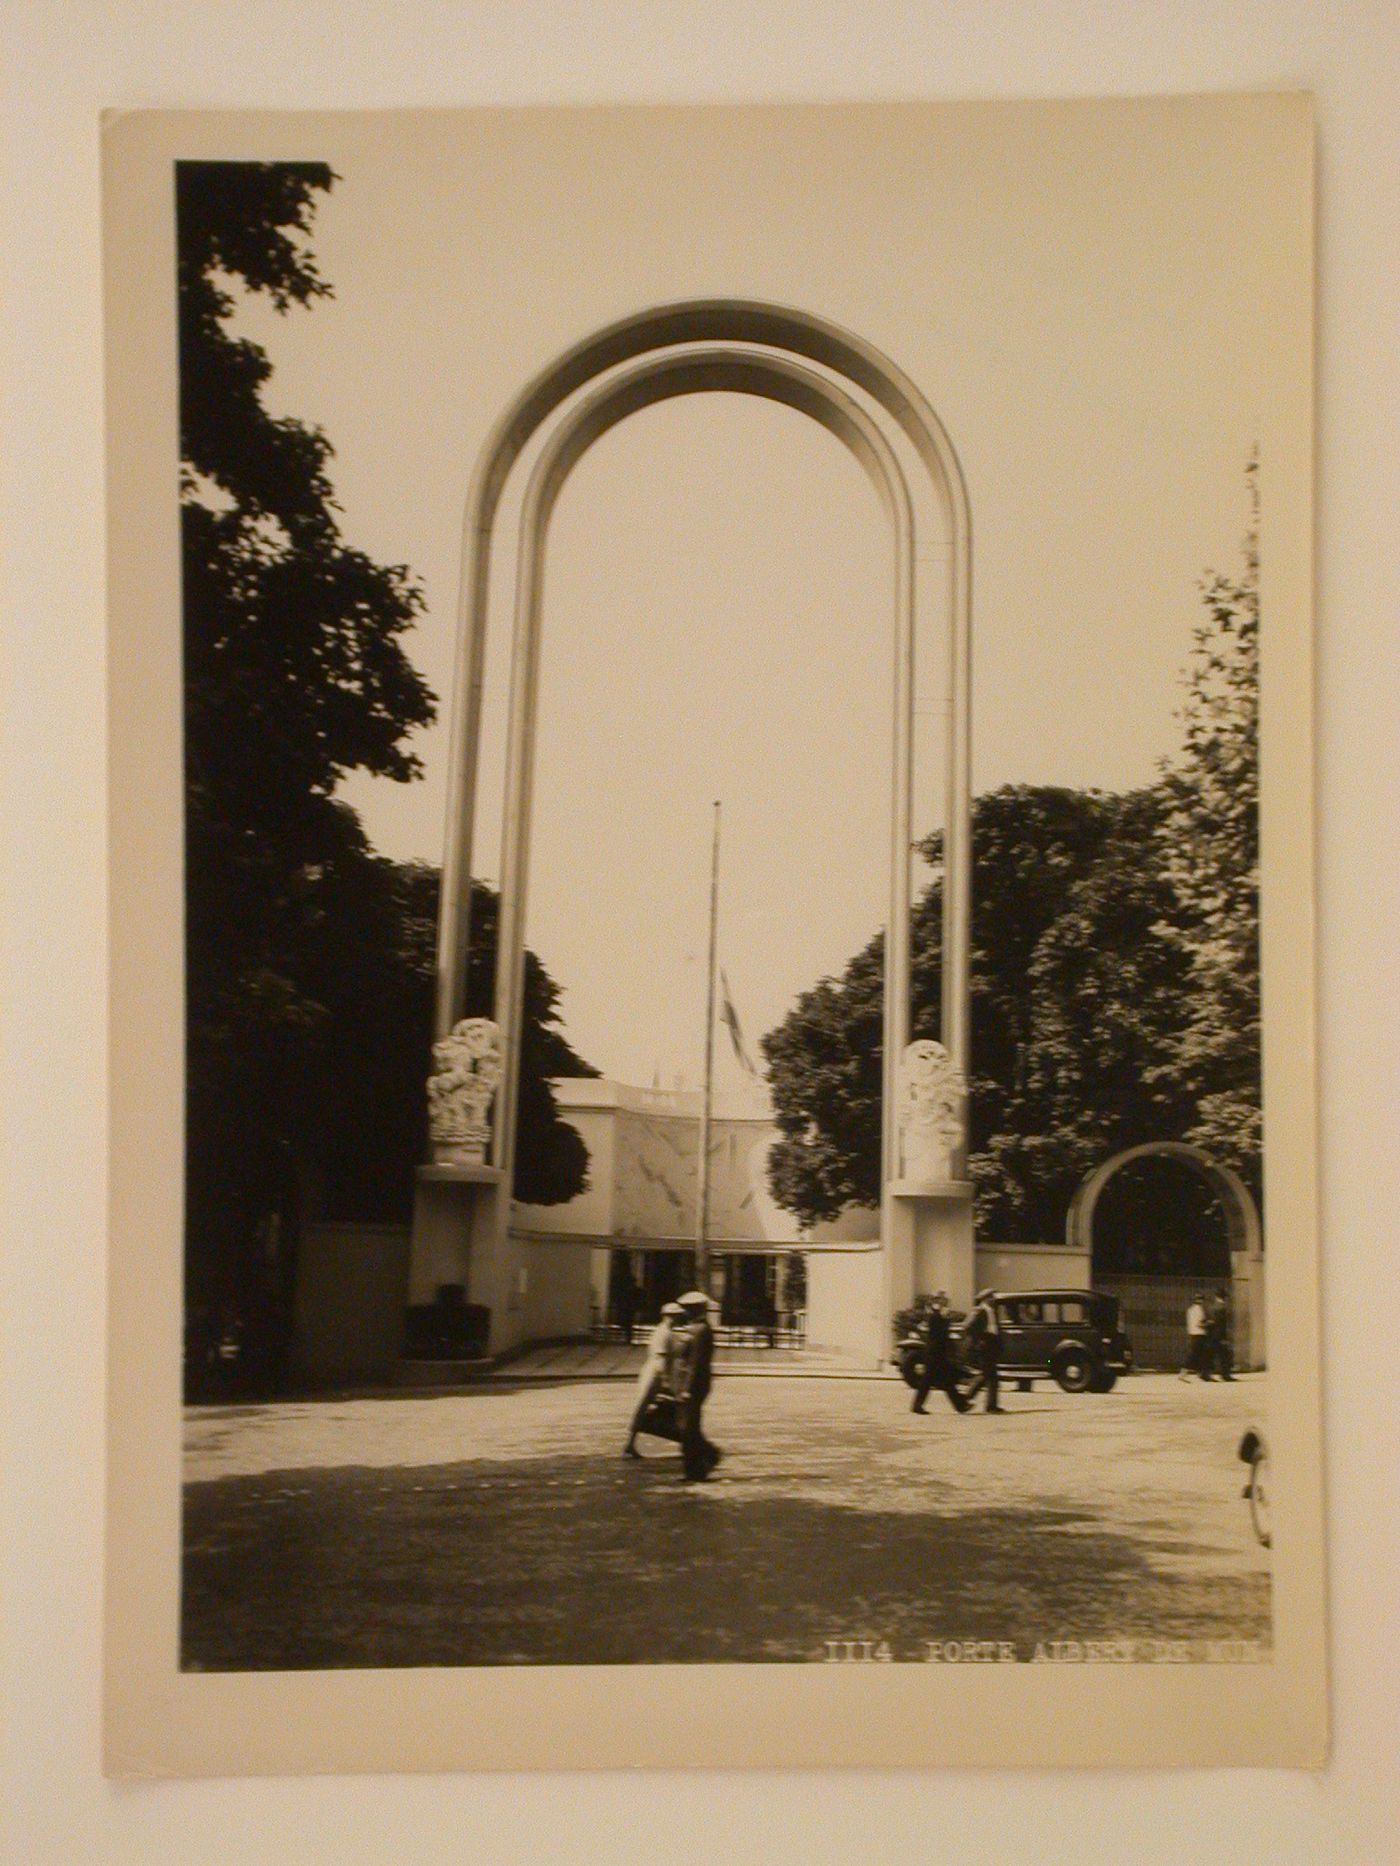 View of the Porte Albert de Mun with the Greek pavilion in the background, 1937 Exposition internationale, Paris, France